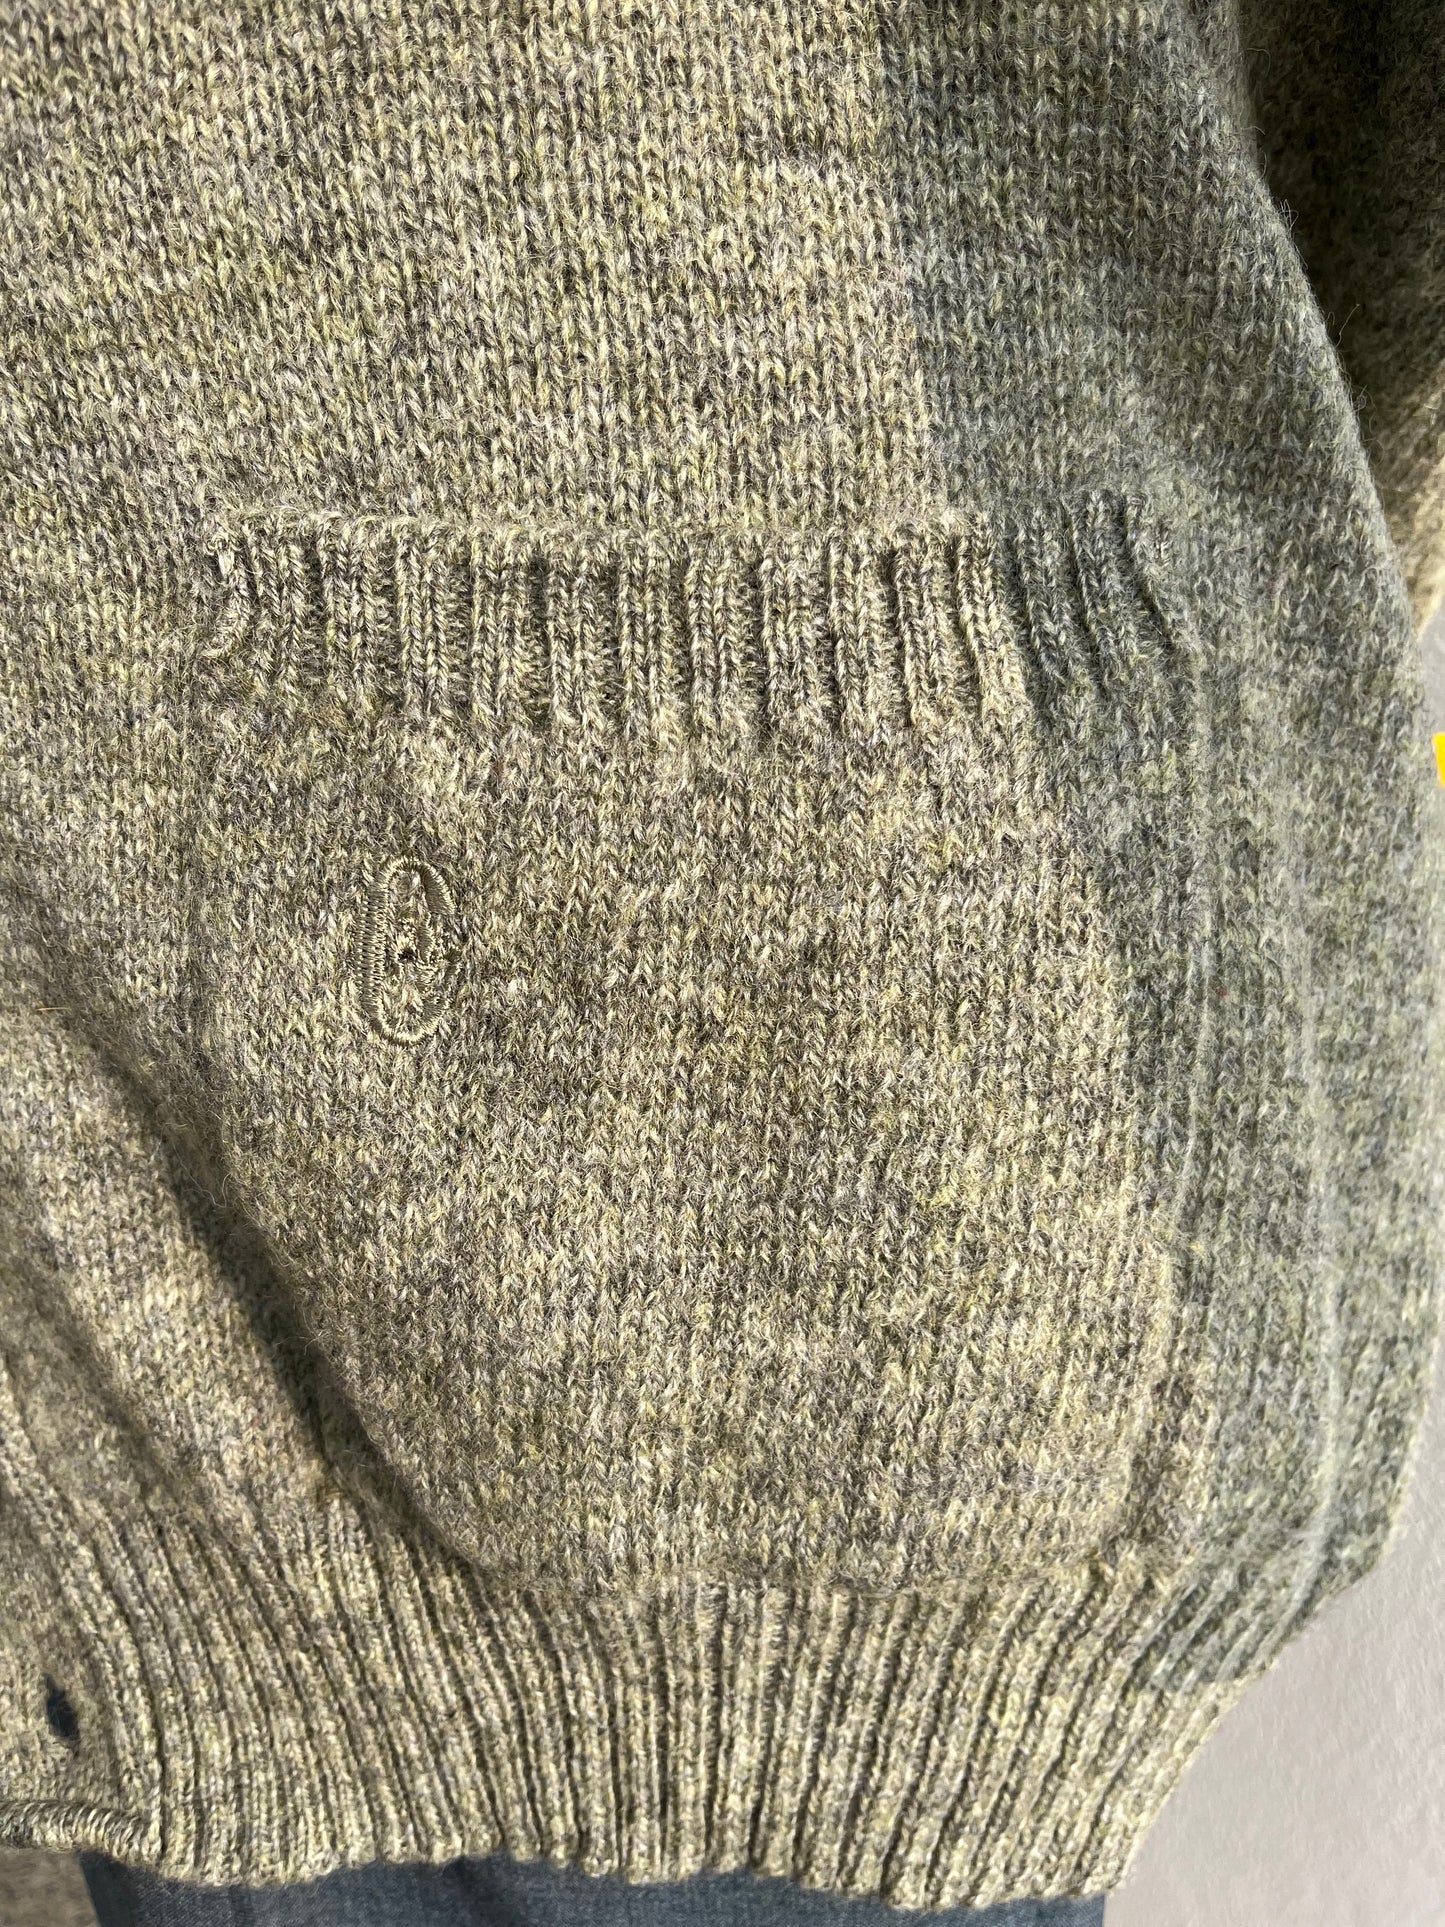 Cardigan of Florence anni ‘80